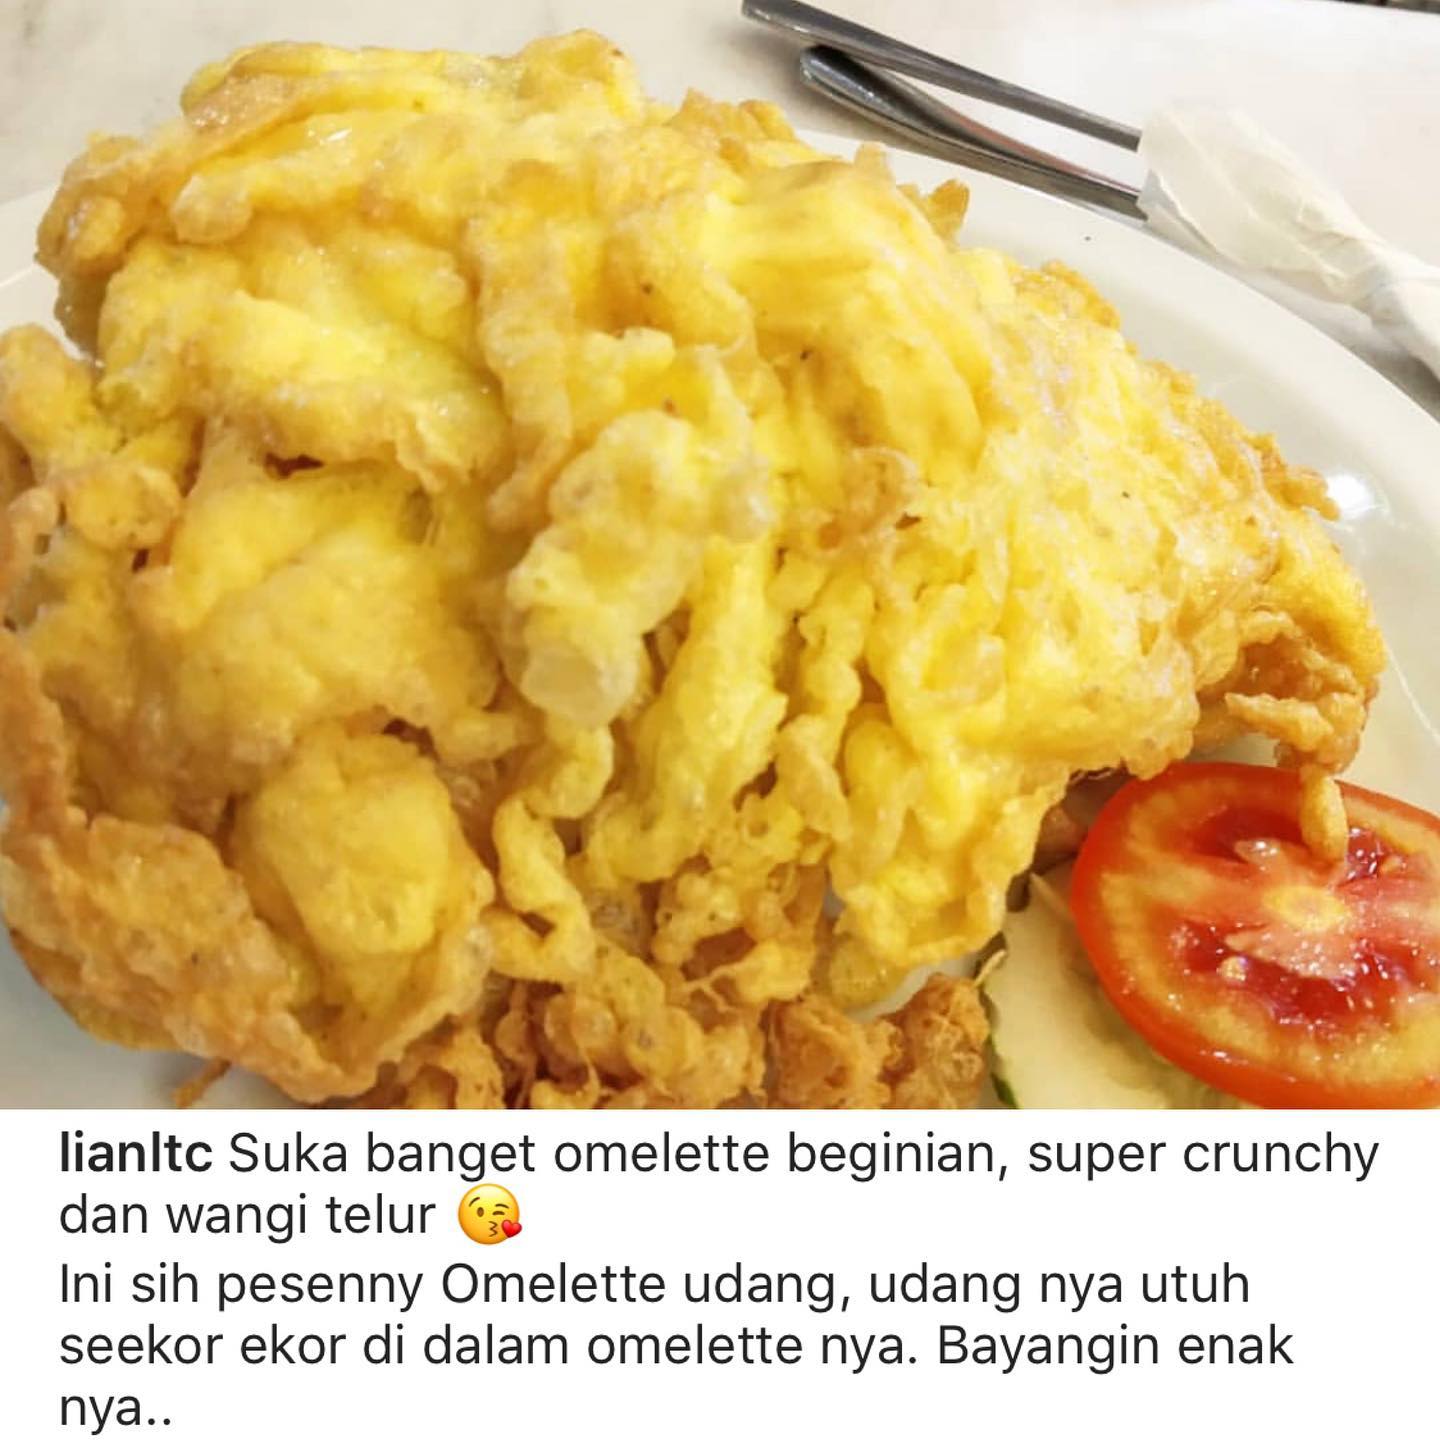 Thai Omelette super crunchy!
“Suka banget, enak banget”
Thank you for sharing your kindest review @lianltc 
Read more